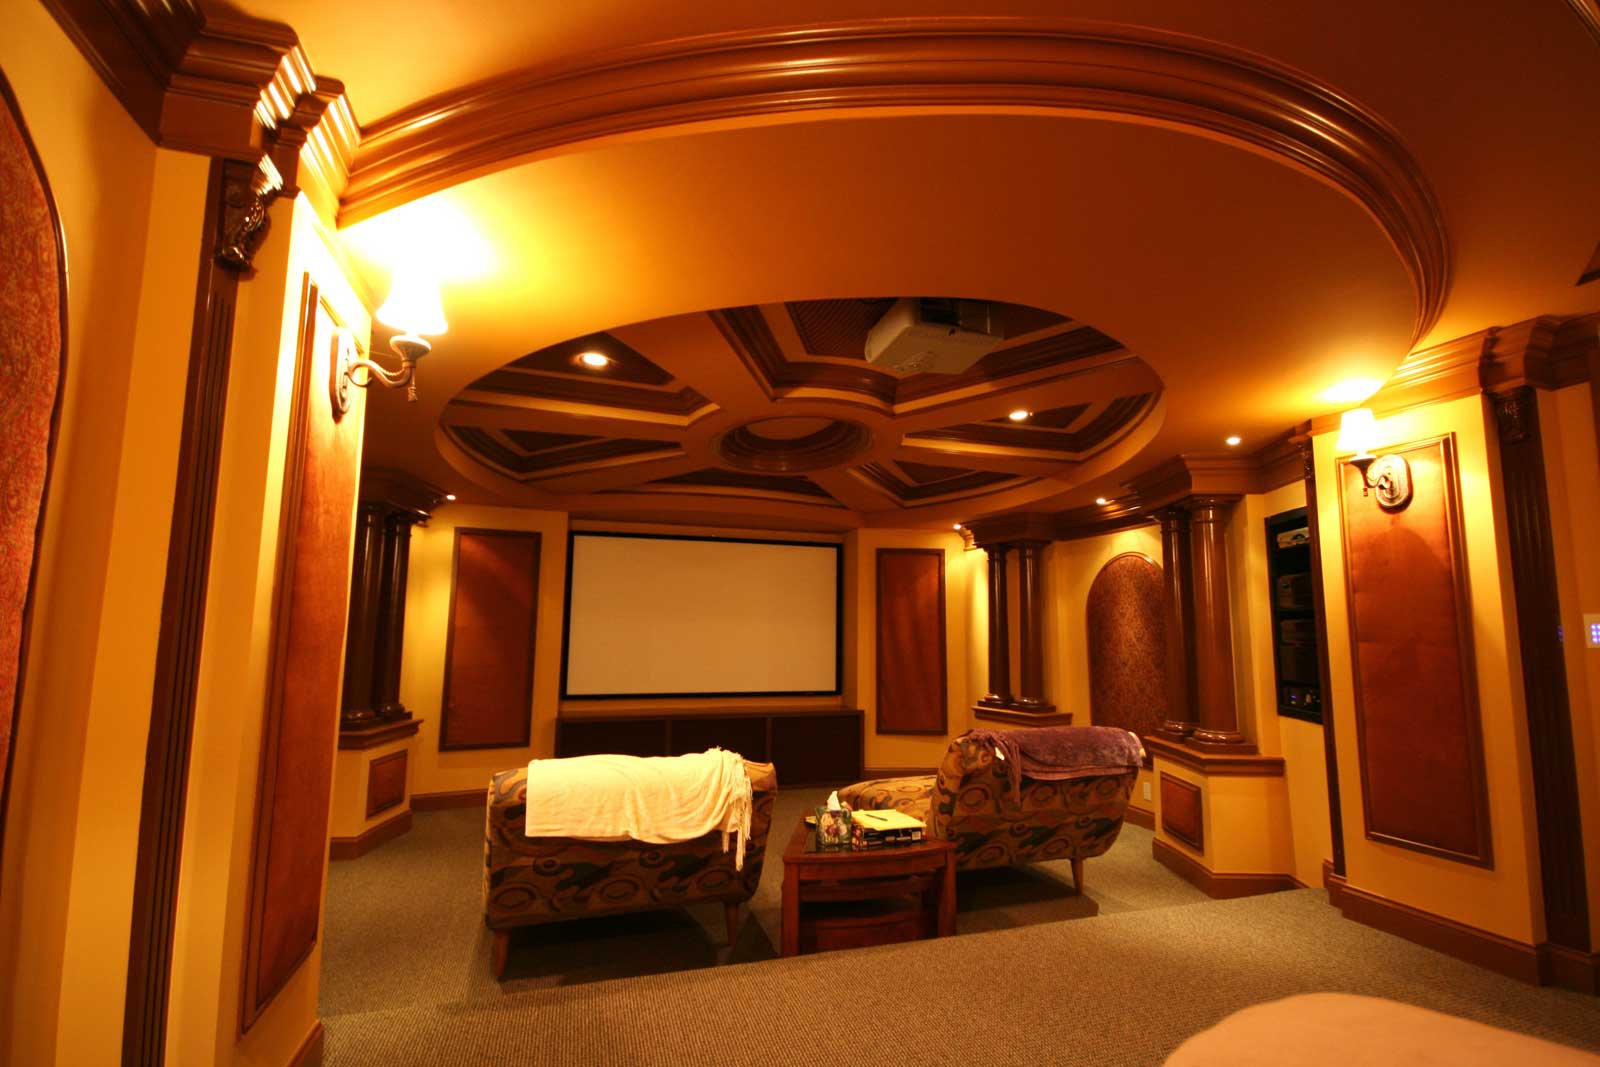 Gold Themed Theater Luxury Gold Themed Living Room Theater For Big Room Design Ideas With Unique Ornament On Ceiling Design And Contemporary Sofa Bed Idea Also Modern Wall Mounted Flat TV Design Ideas Living Room 20 Stylish Living Room Theater For The Beautiful Media Rooms